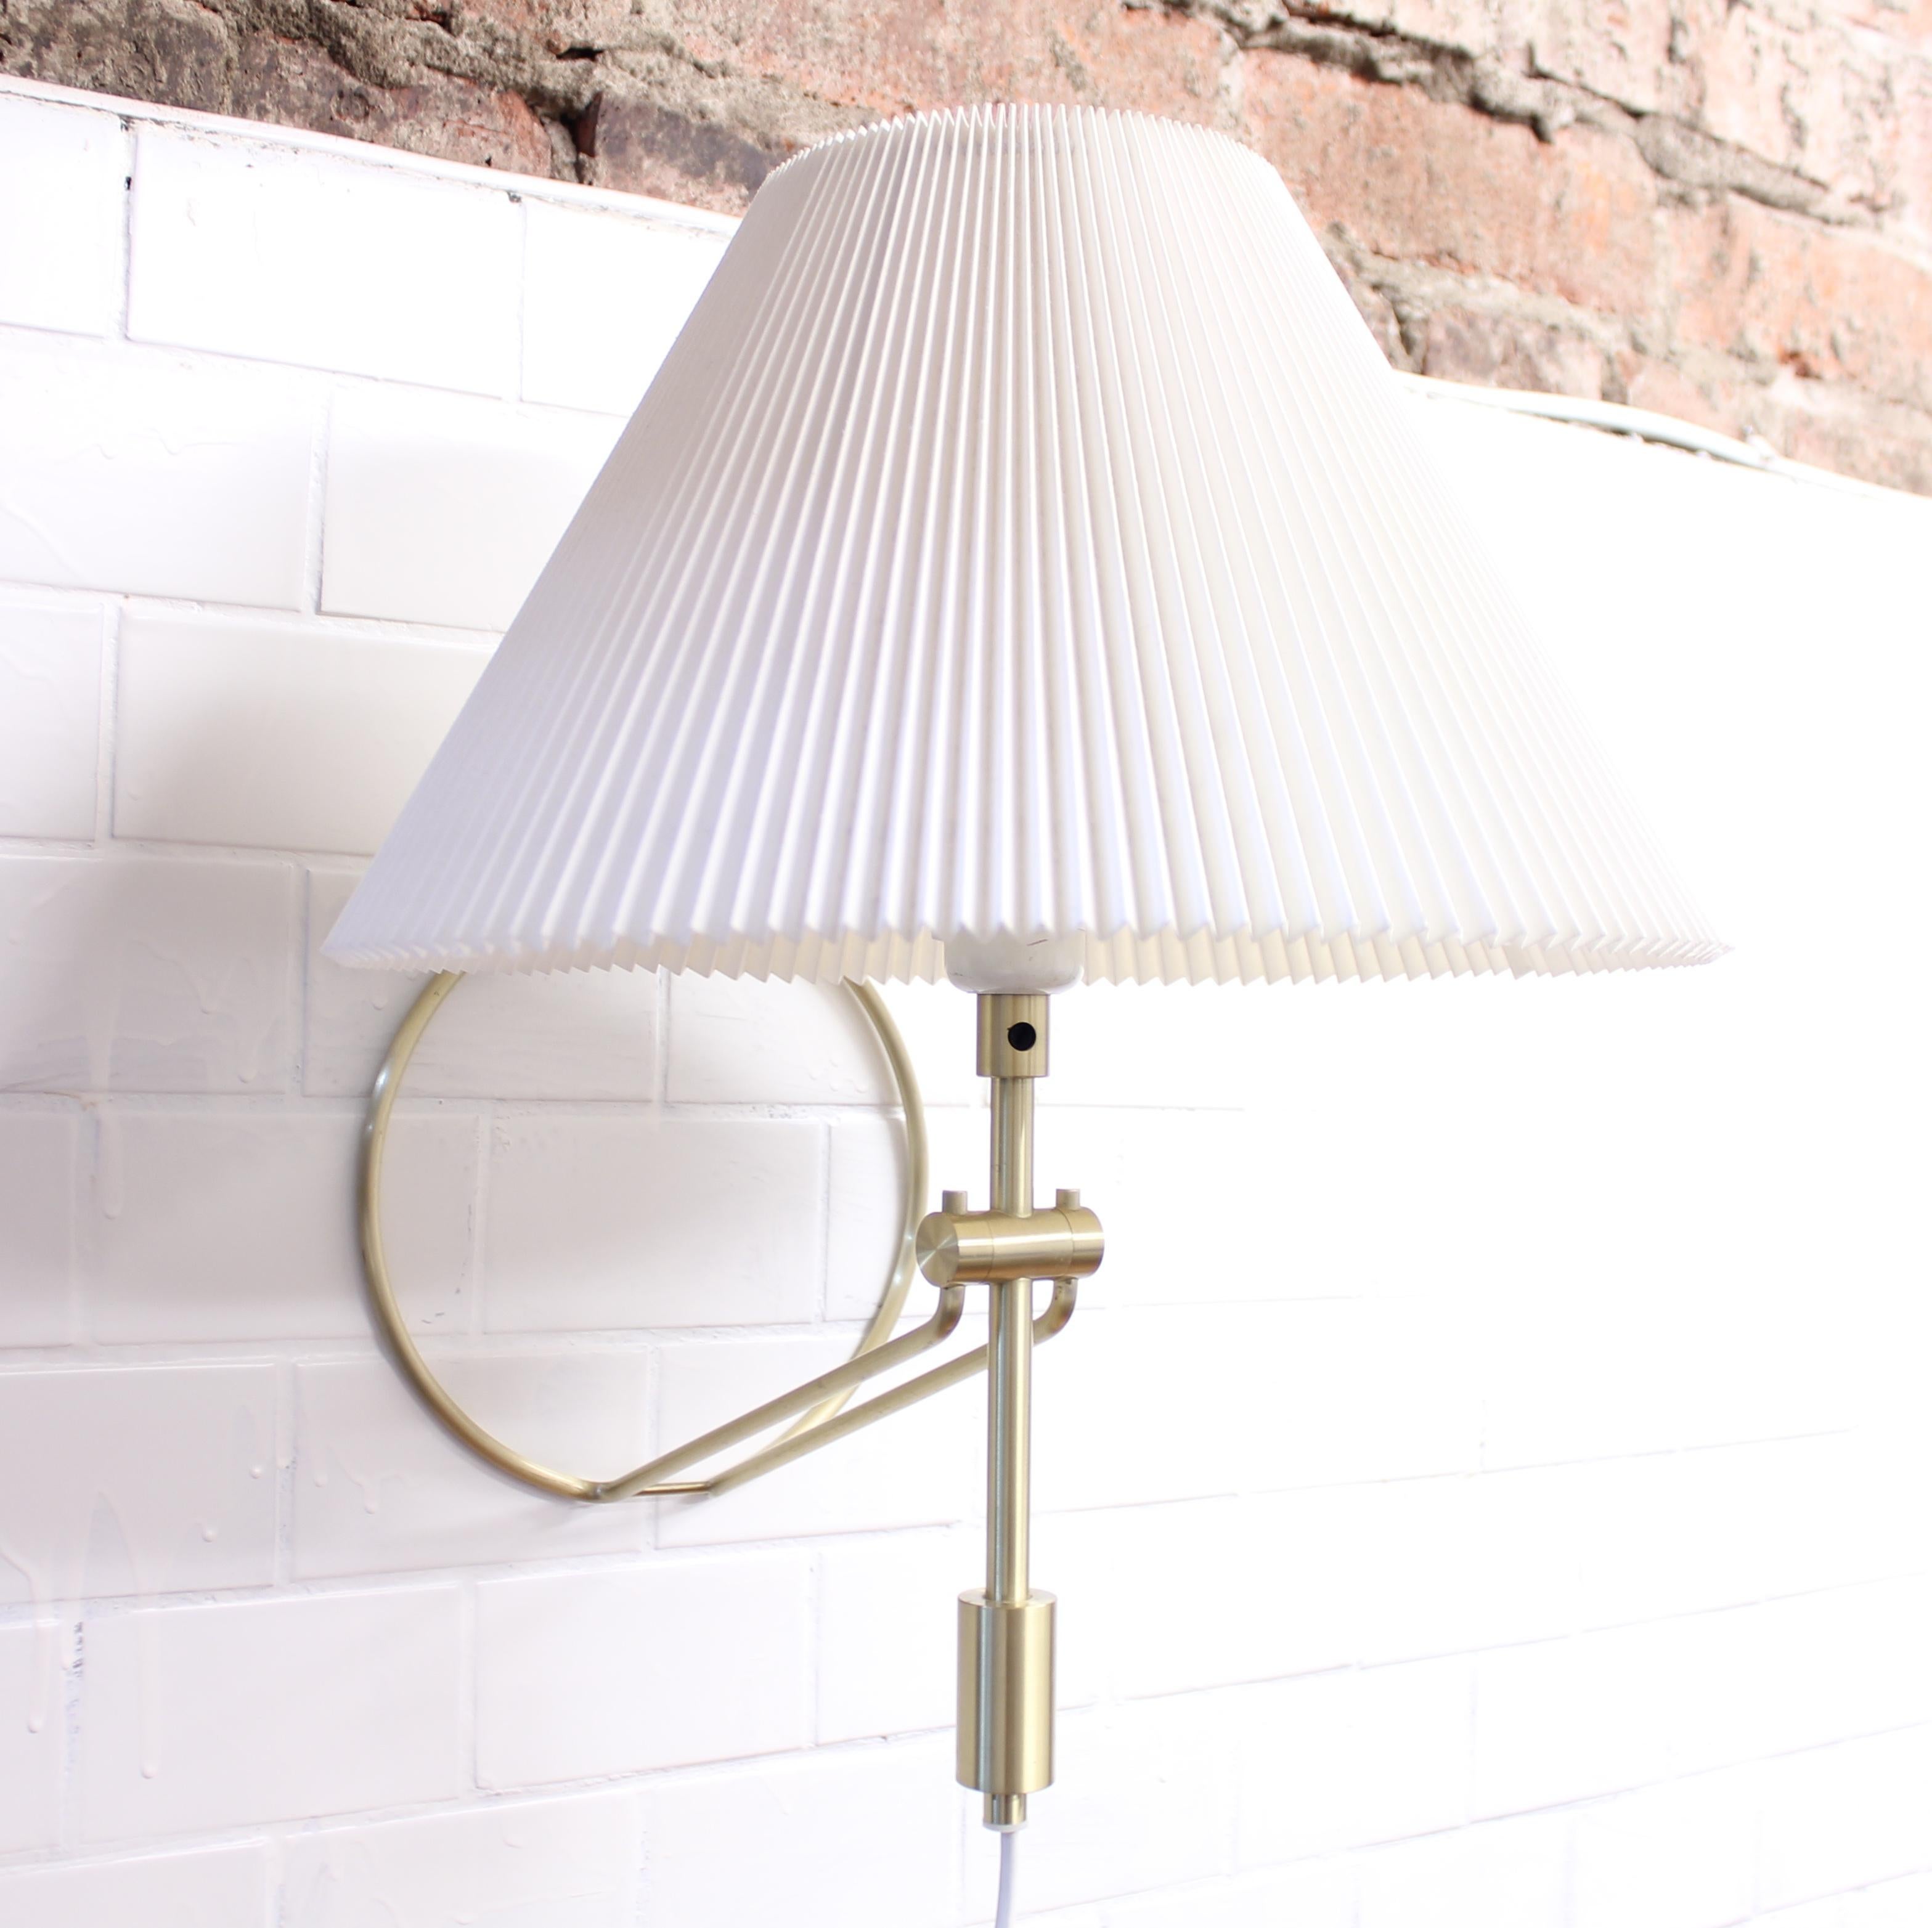 Danish brass table and wall lamp, model 305, with circular base manufactured by Danish company Le Klint. Crimped paper shade, possibly a later addition but very close to the original shape and form. Marked with sticker by maker. Very good vintage